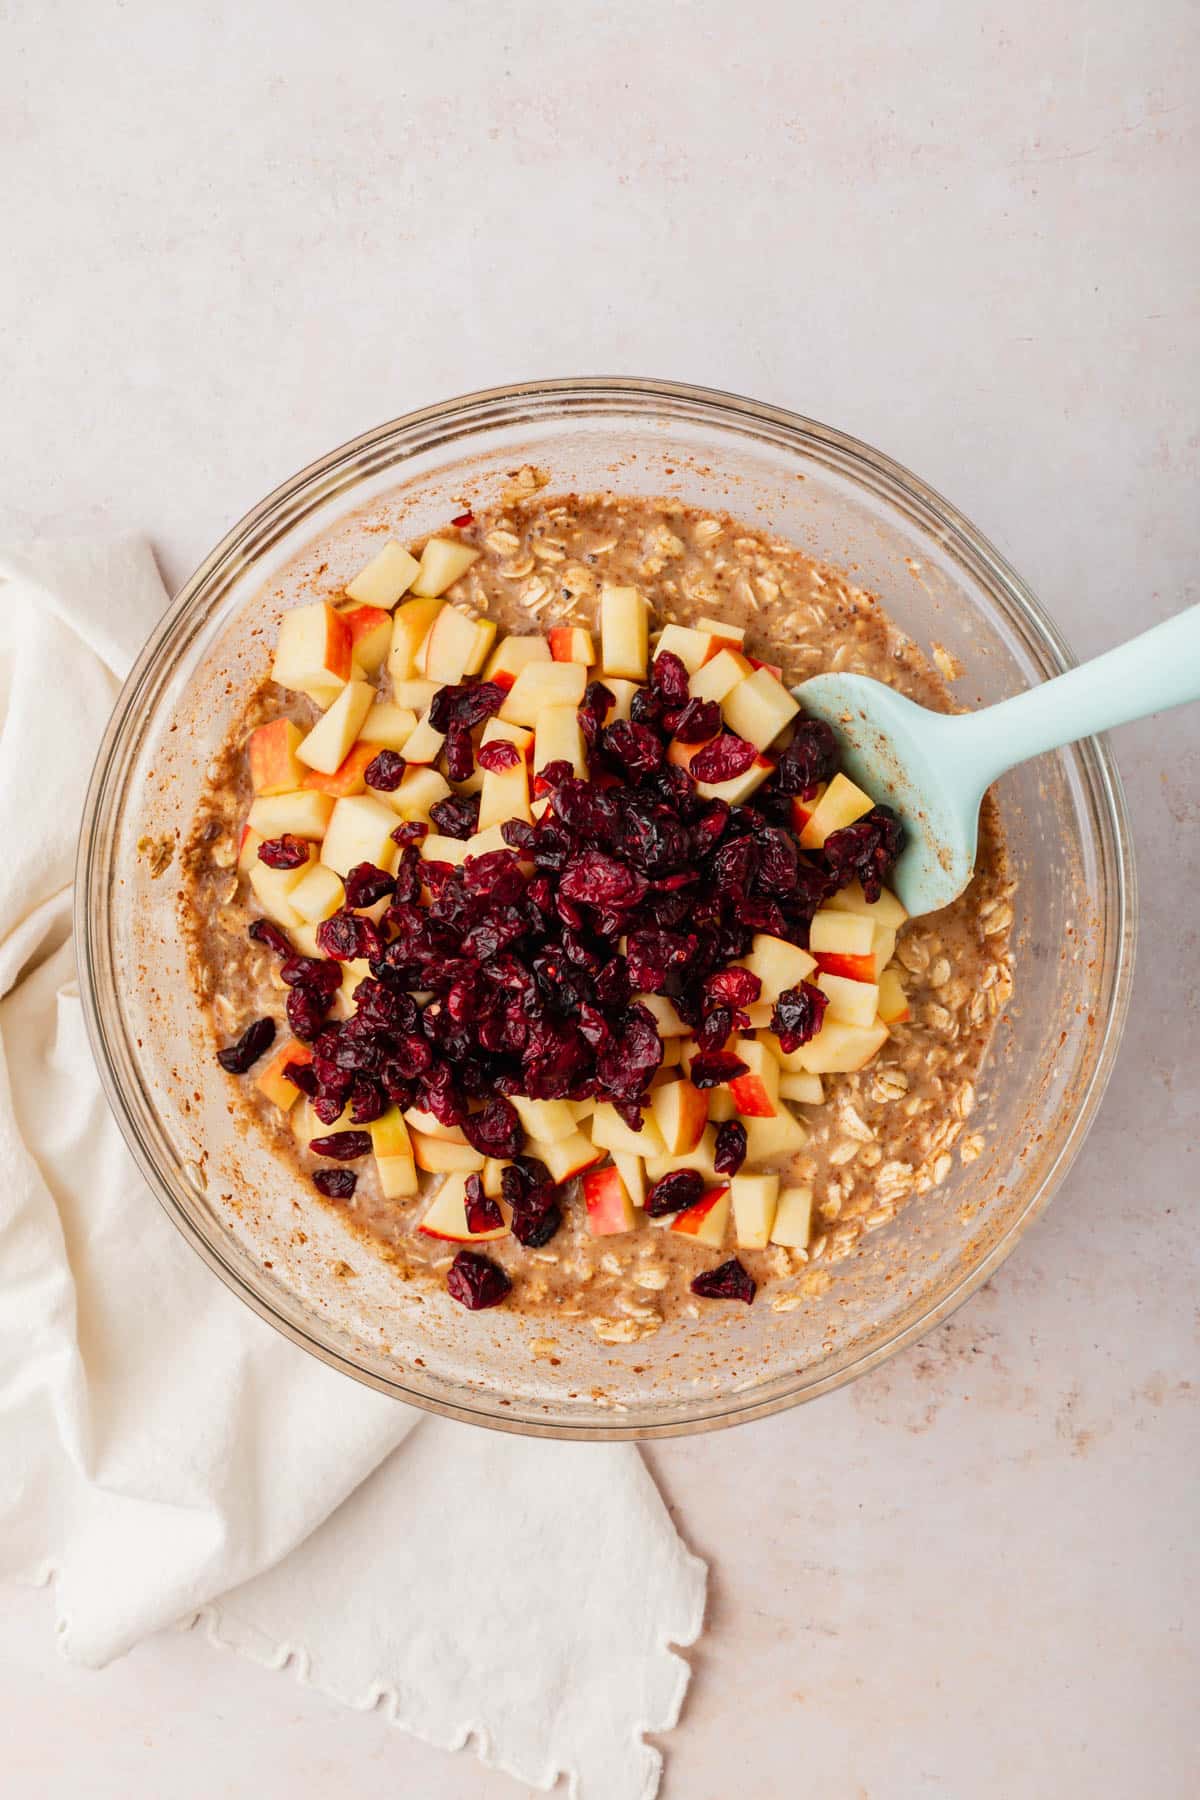 A glass mixing bowl with an oatmeal mixture topped with diced apples and dried cranberries before mixing together.